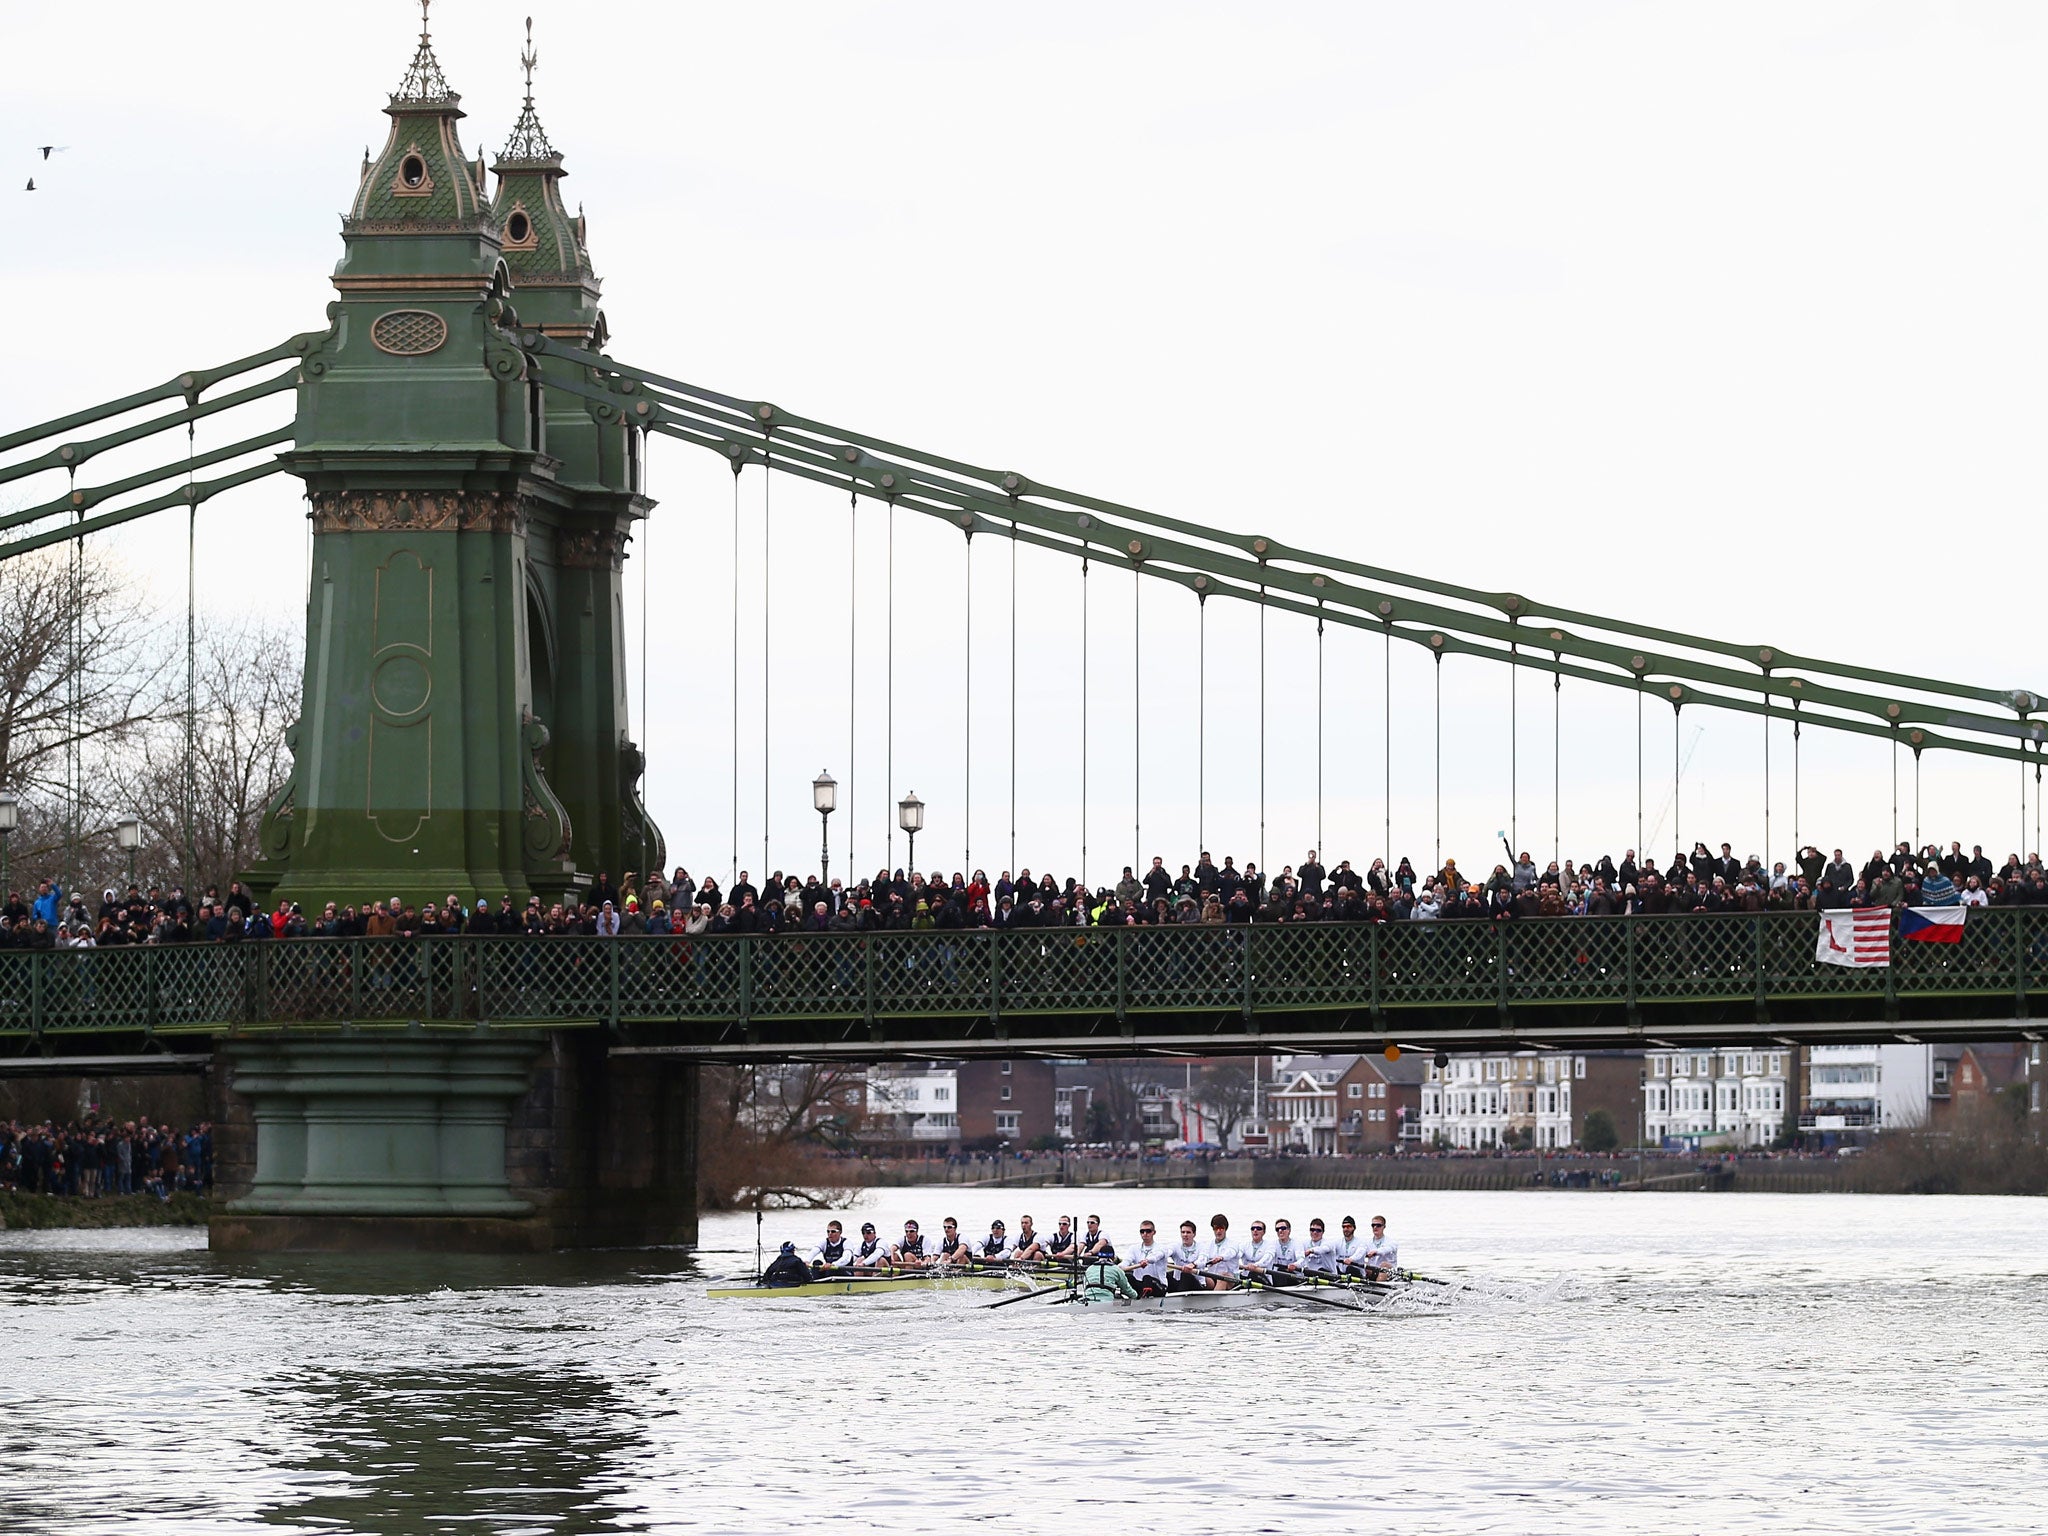 A view of the 2013 Boat Race